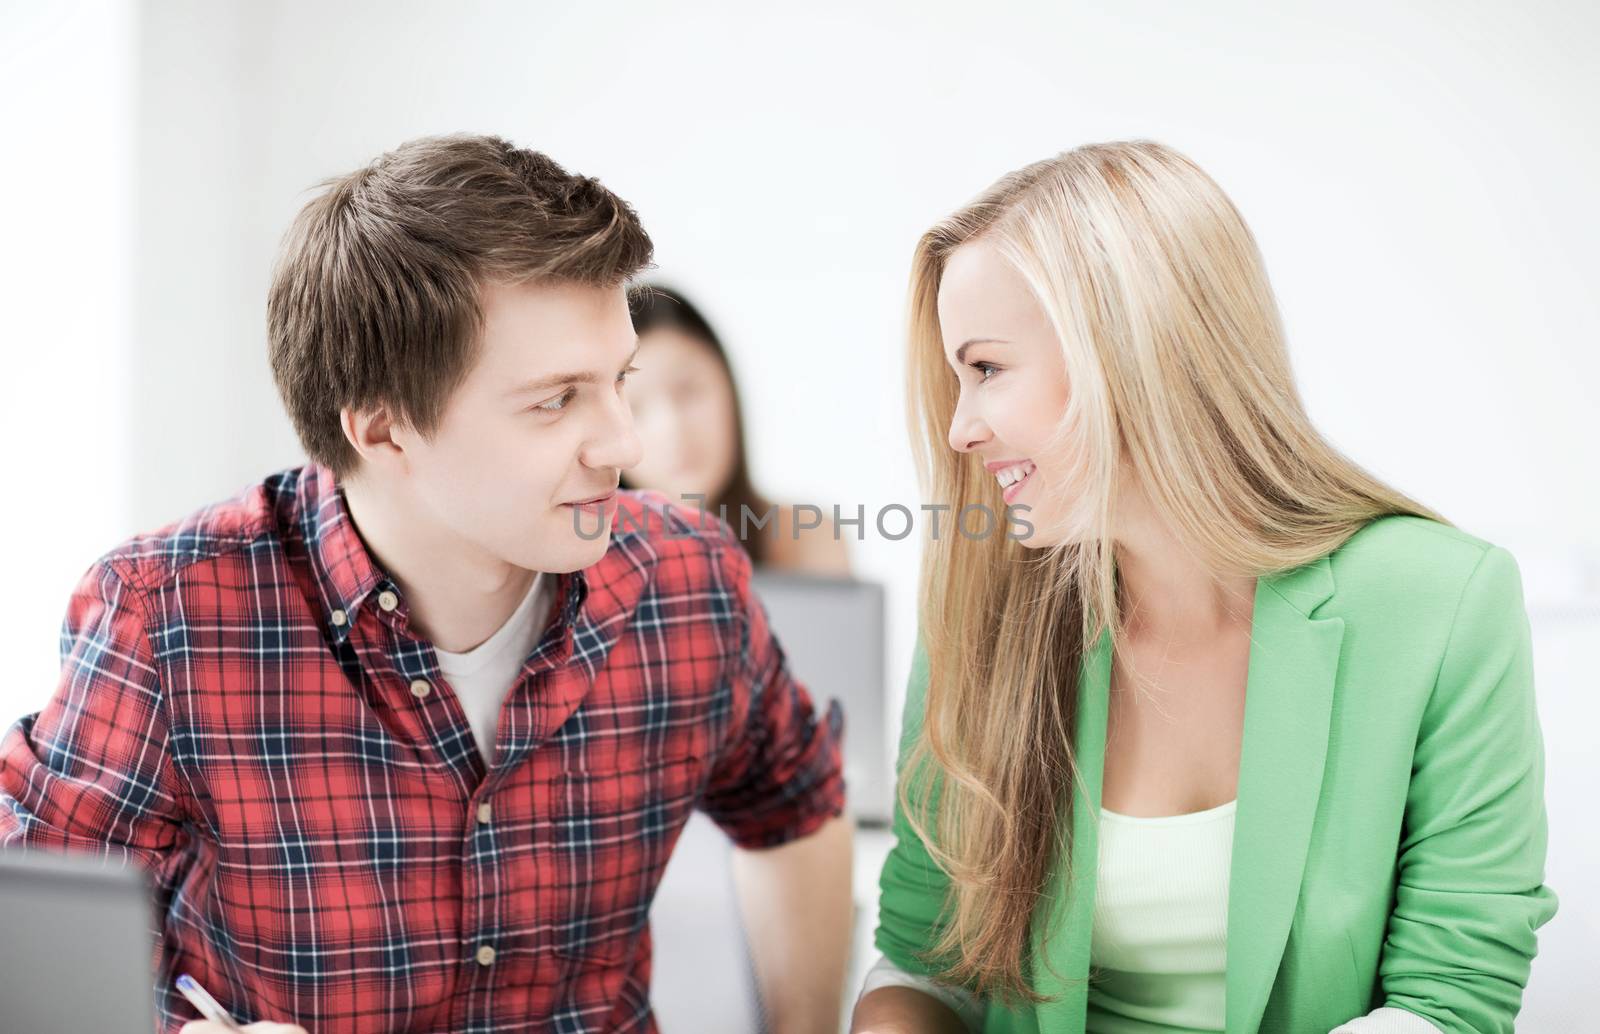 friendship and education concept - picture of smiling students looking at each other at school